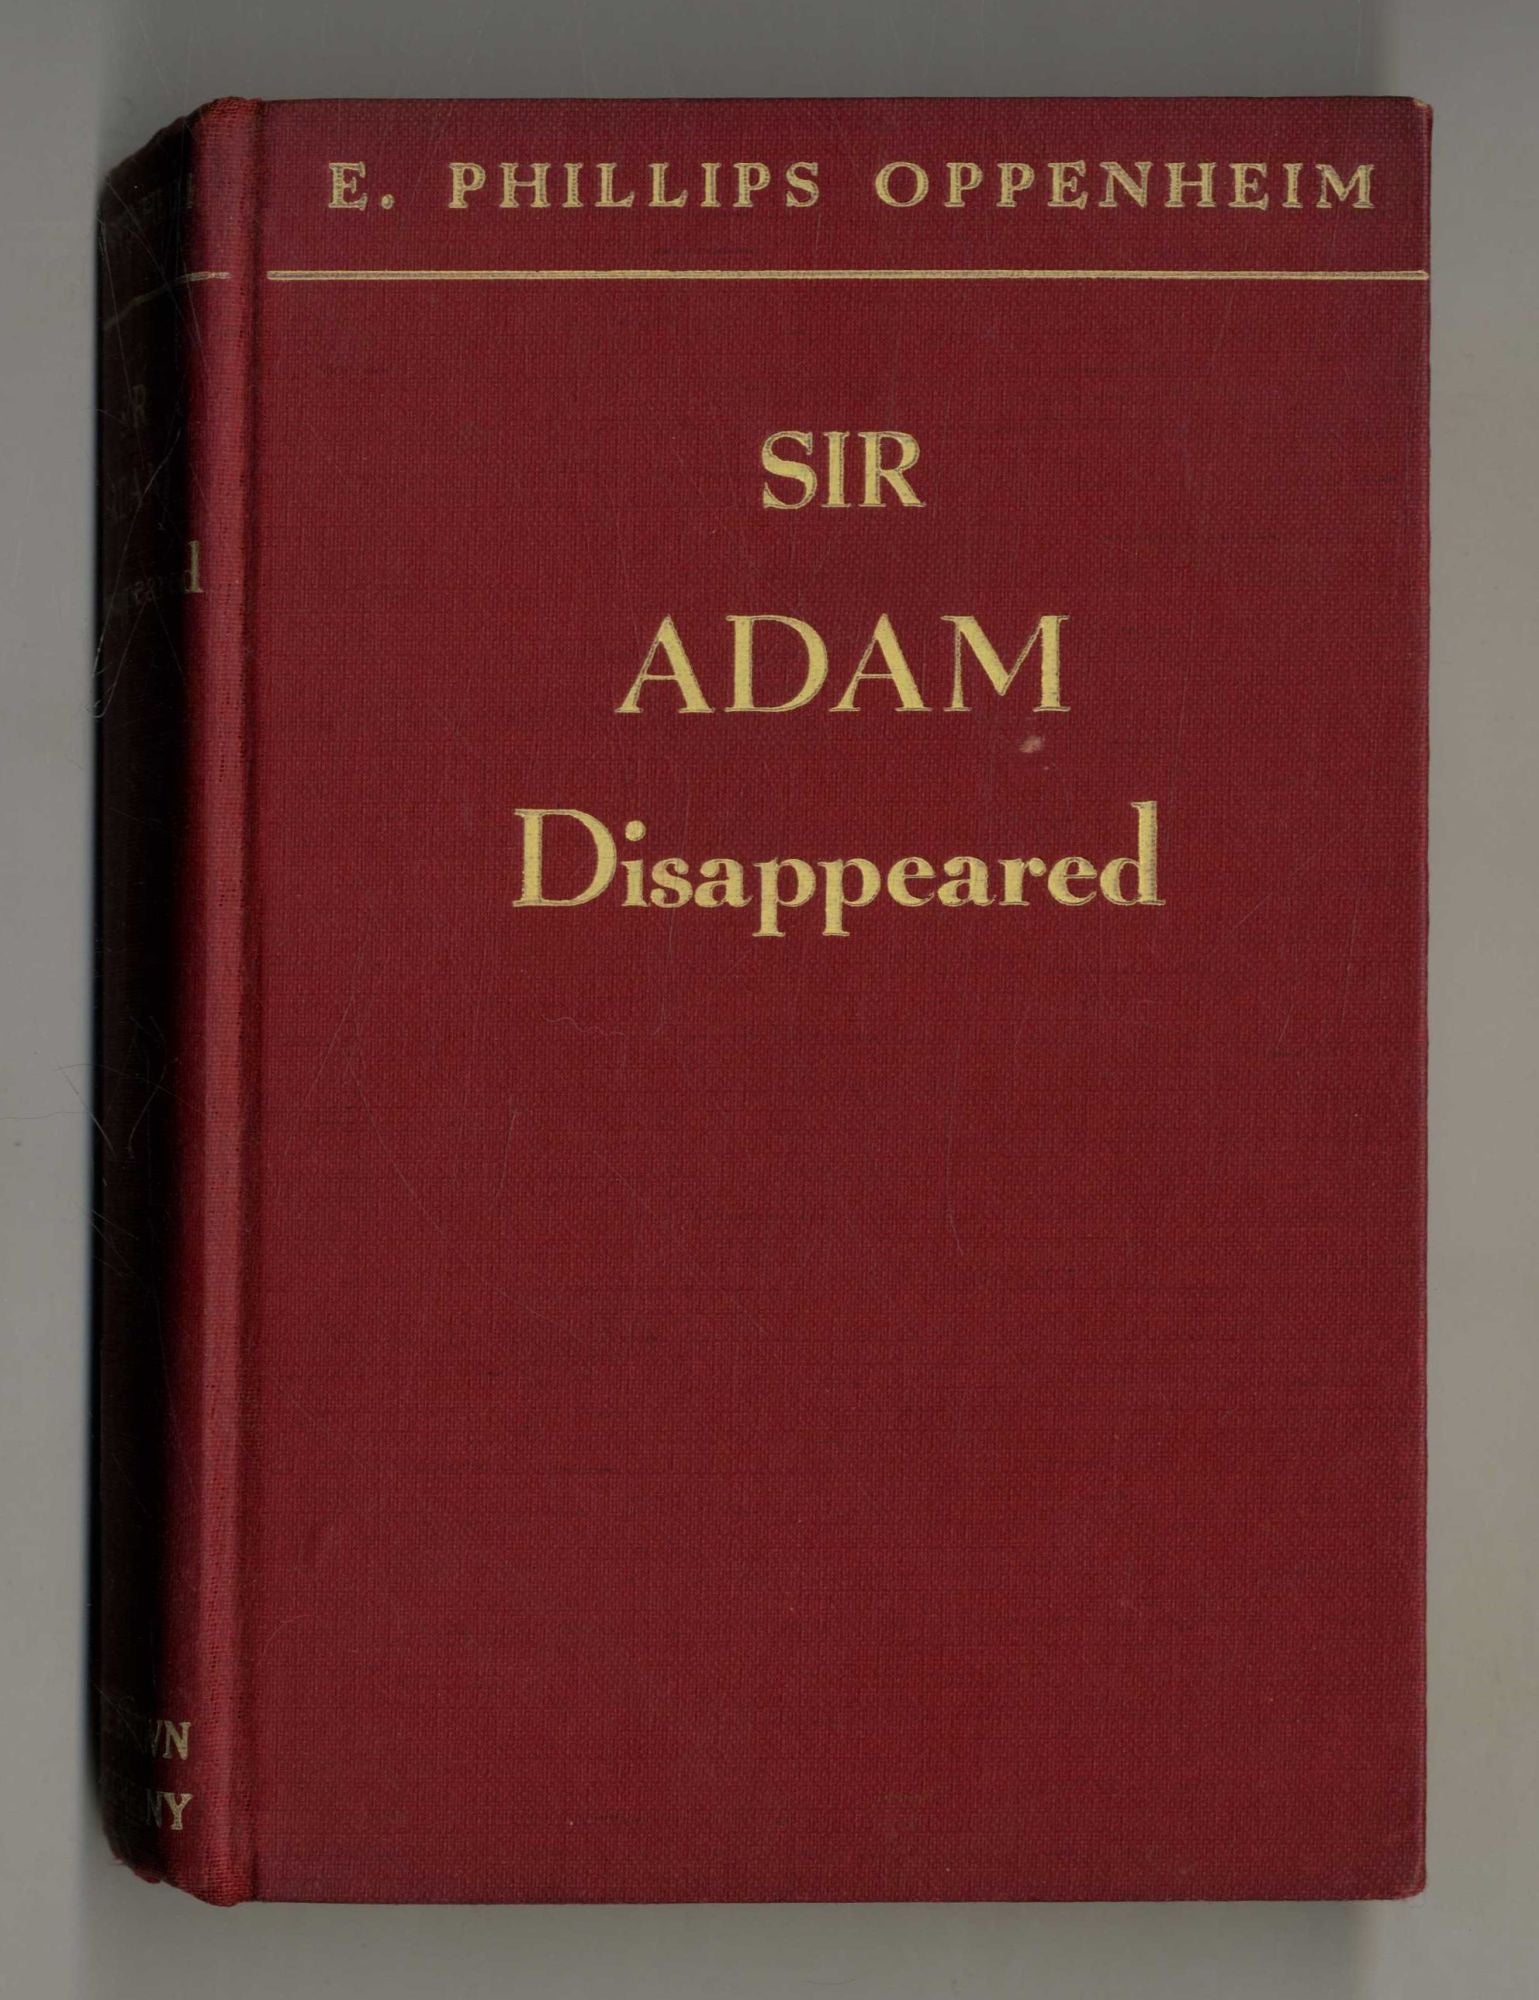 Book #28091 Sir Adam Disappeared - 1st Edition/1st Printing. E. Phillips Oppenheim.